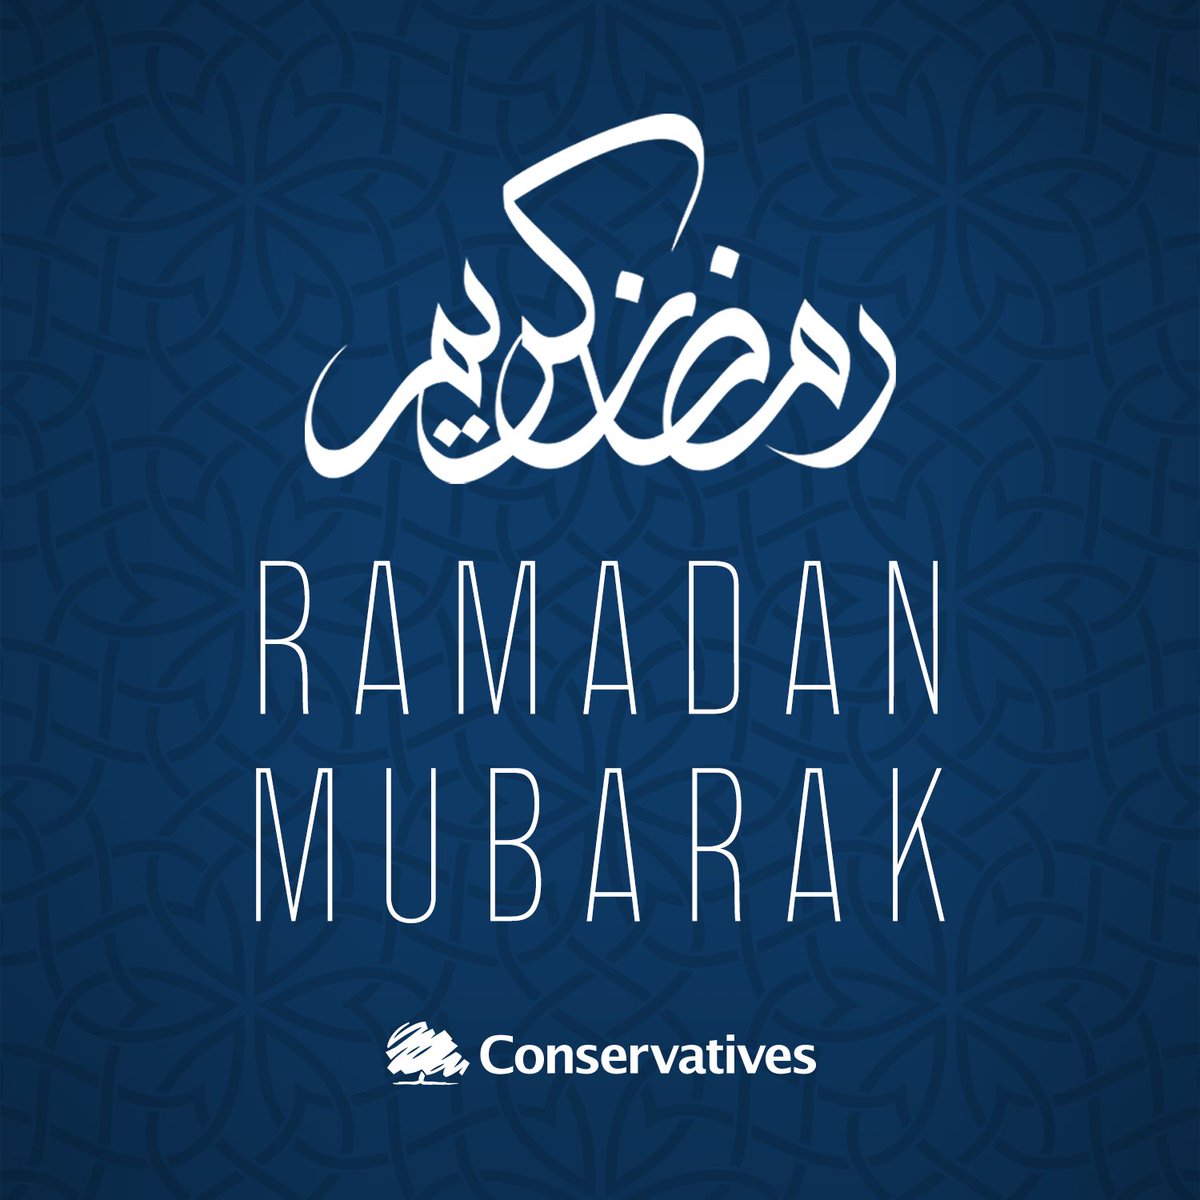 Wishing a happy and blessed Ramadan to Muslims in the UK and around the world 🌙 #ramadanmubarak